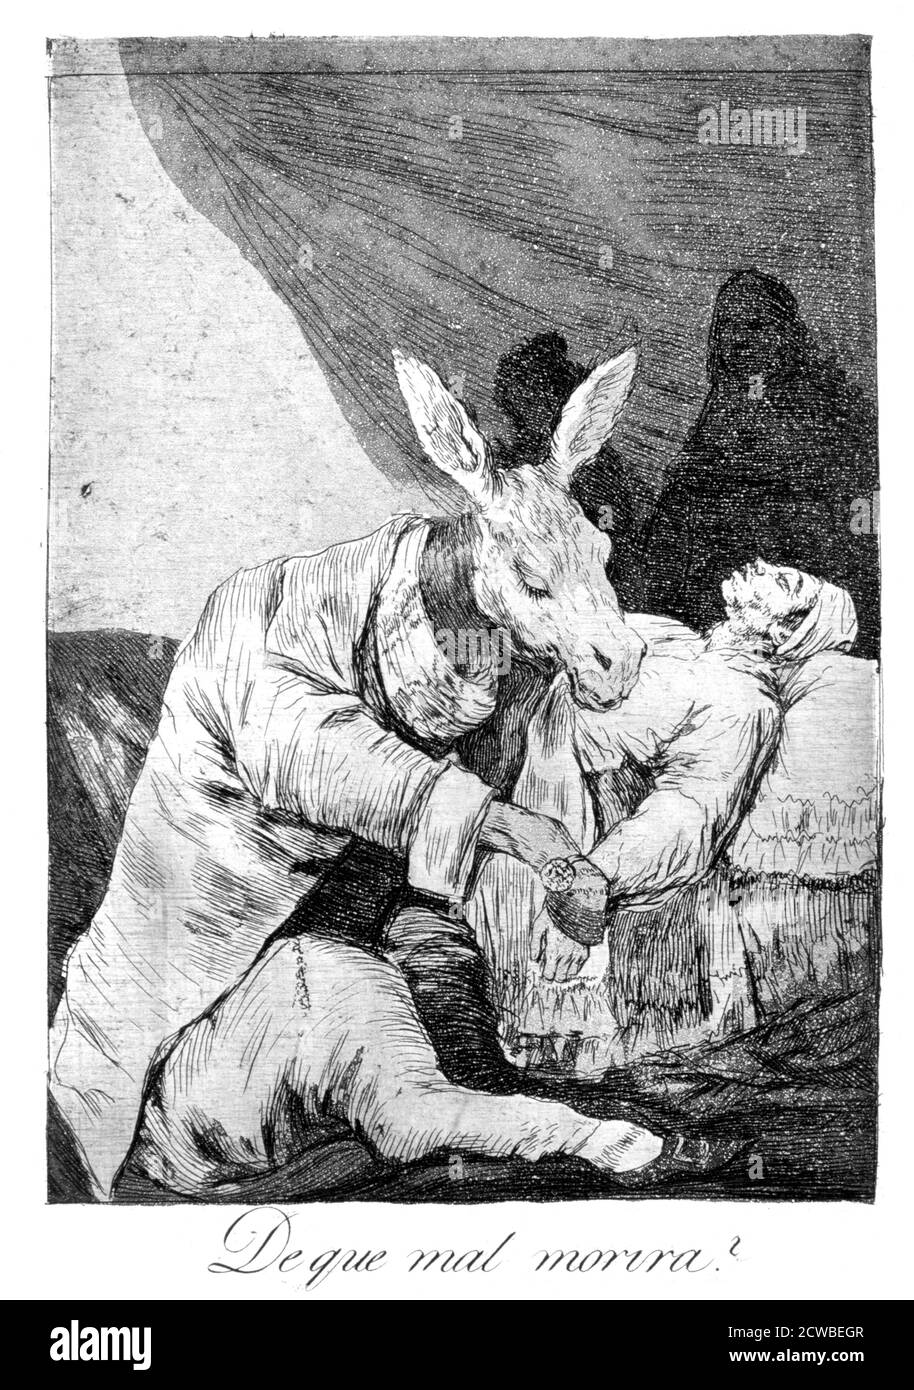 Of what ill he die?', 1799 Artist: Francisco Goya. Plate 40 of 'Los Caprichos'. Los Caprichos are a set of 80 prints in aquatint and etching created by the Spanish artist Francisco Goya in 1797 and 1798, and published as an album in 1799. Stock Photo